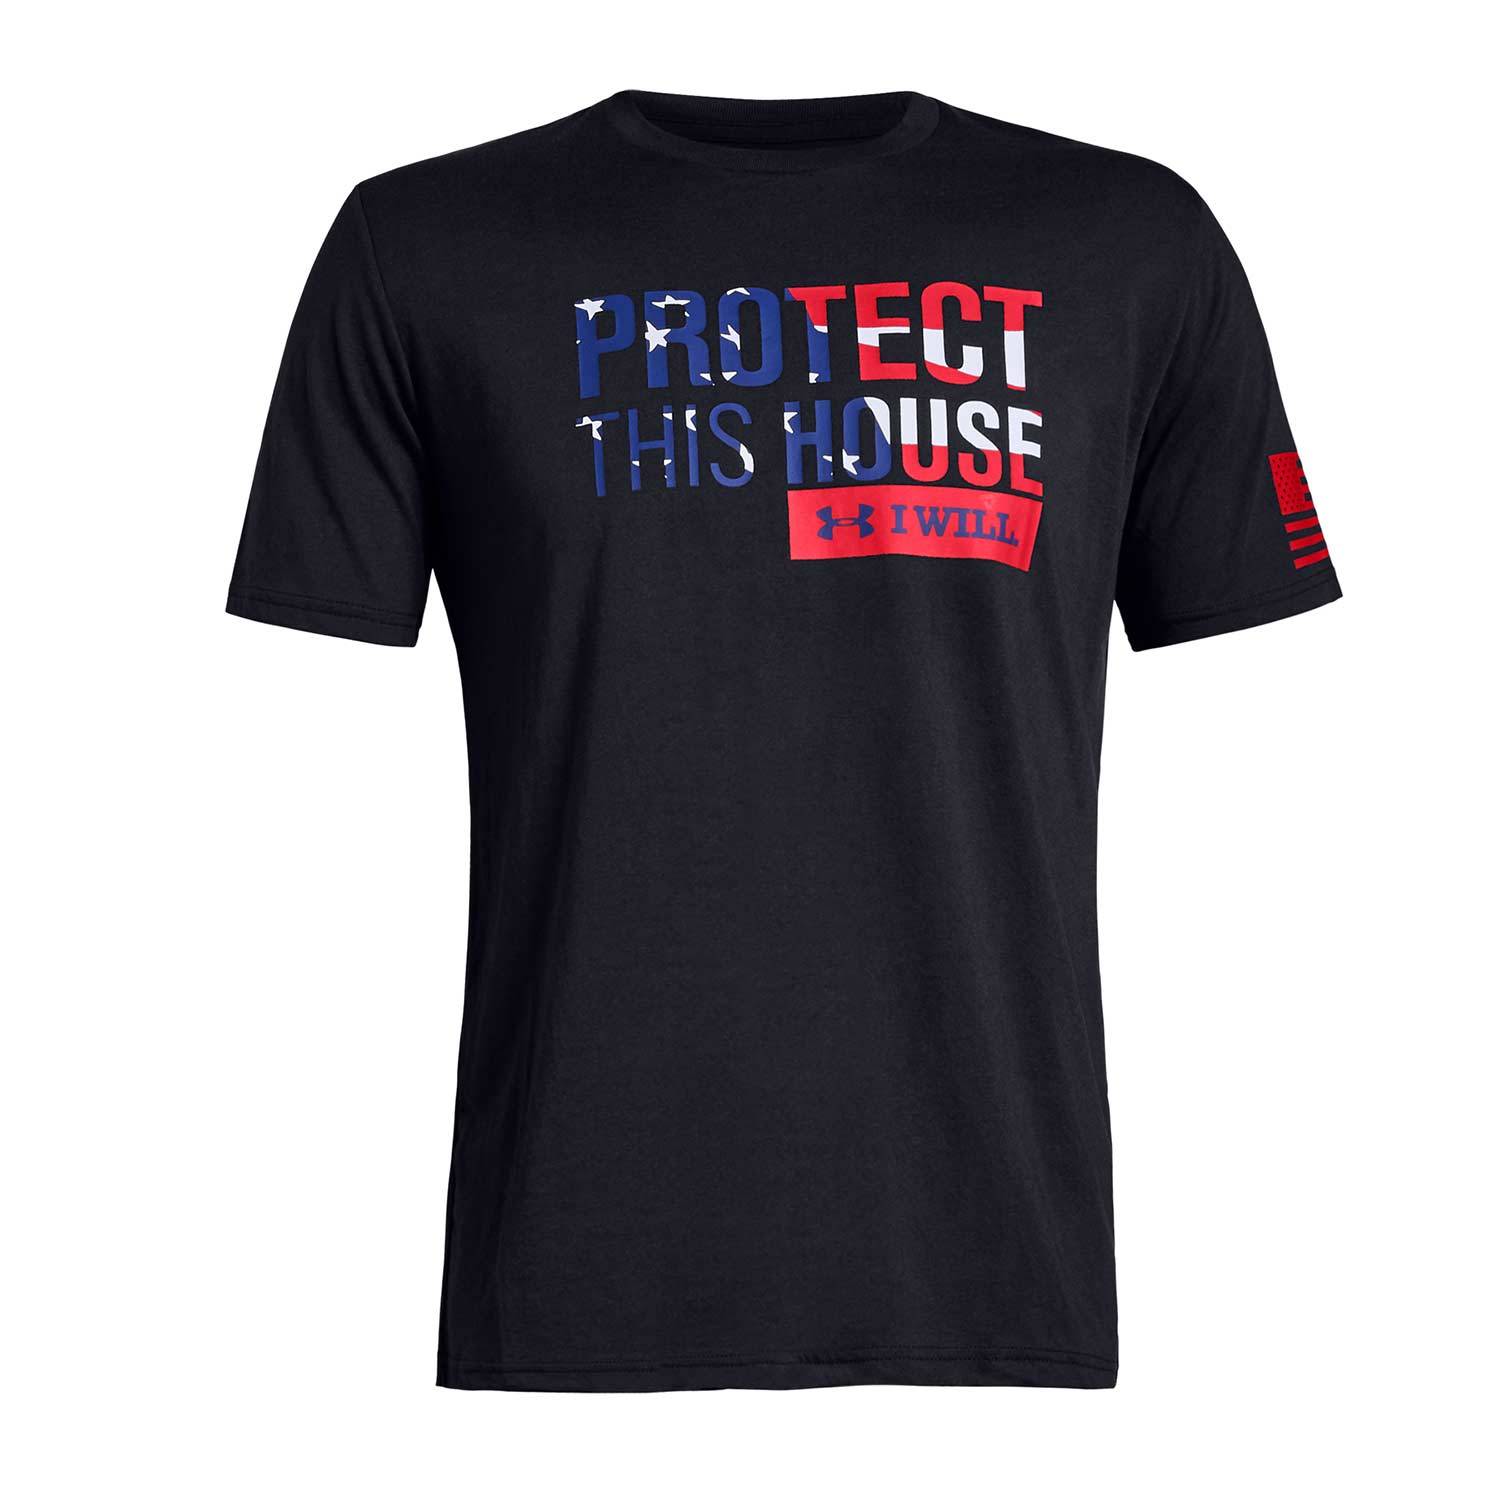 protect this house t shirt